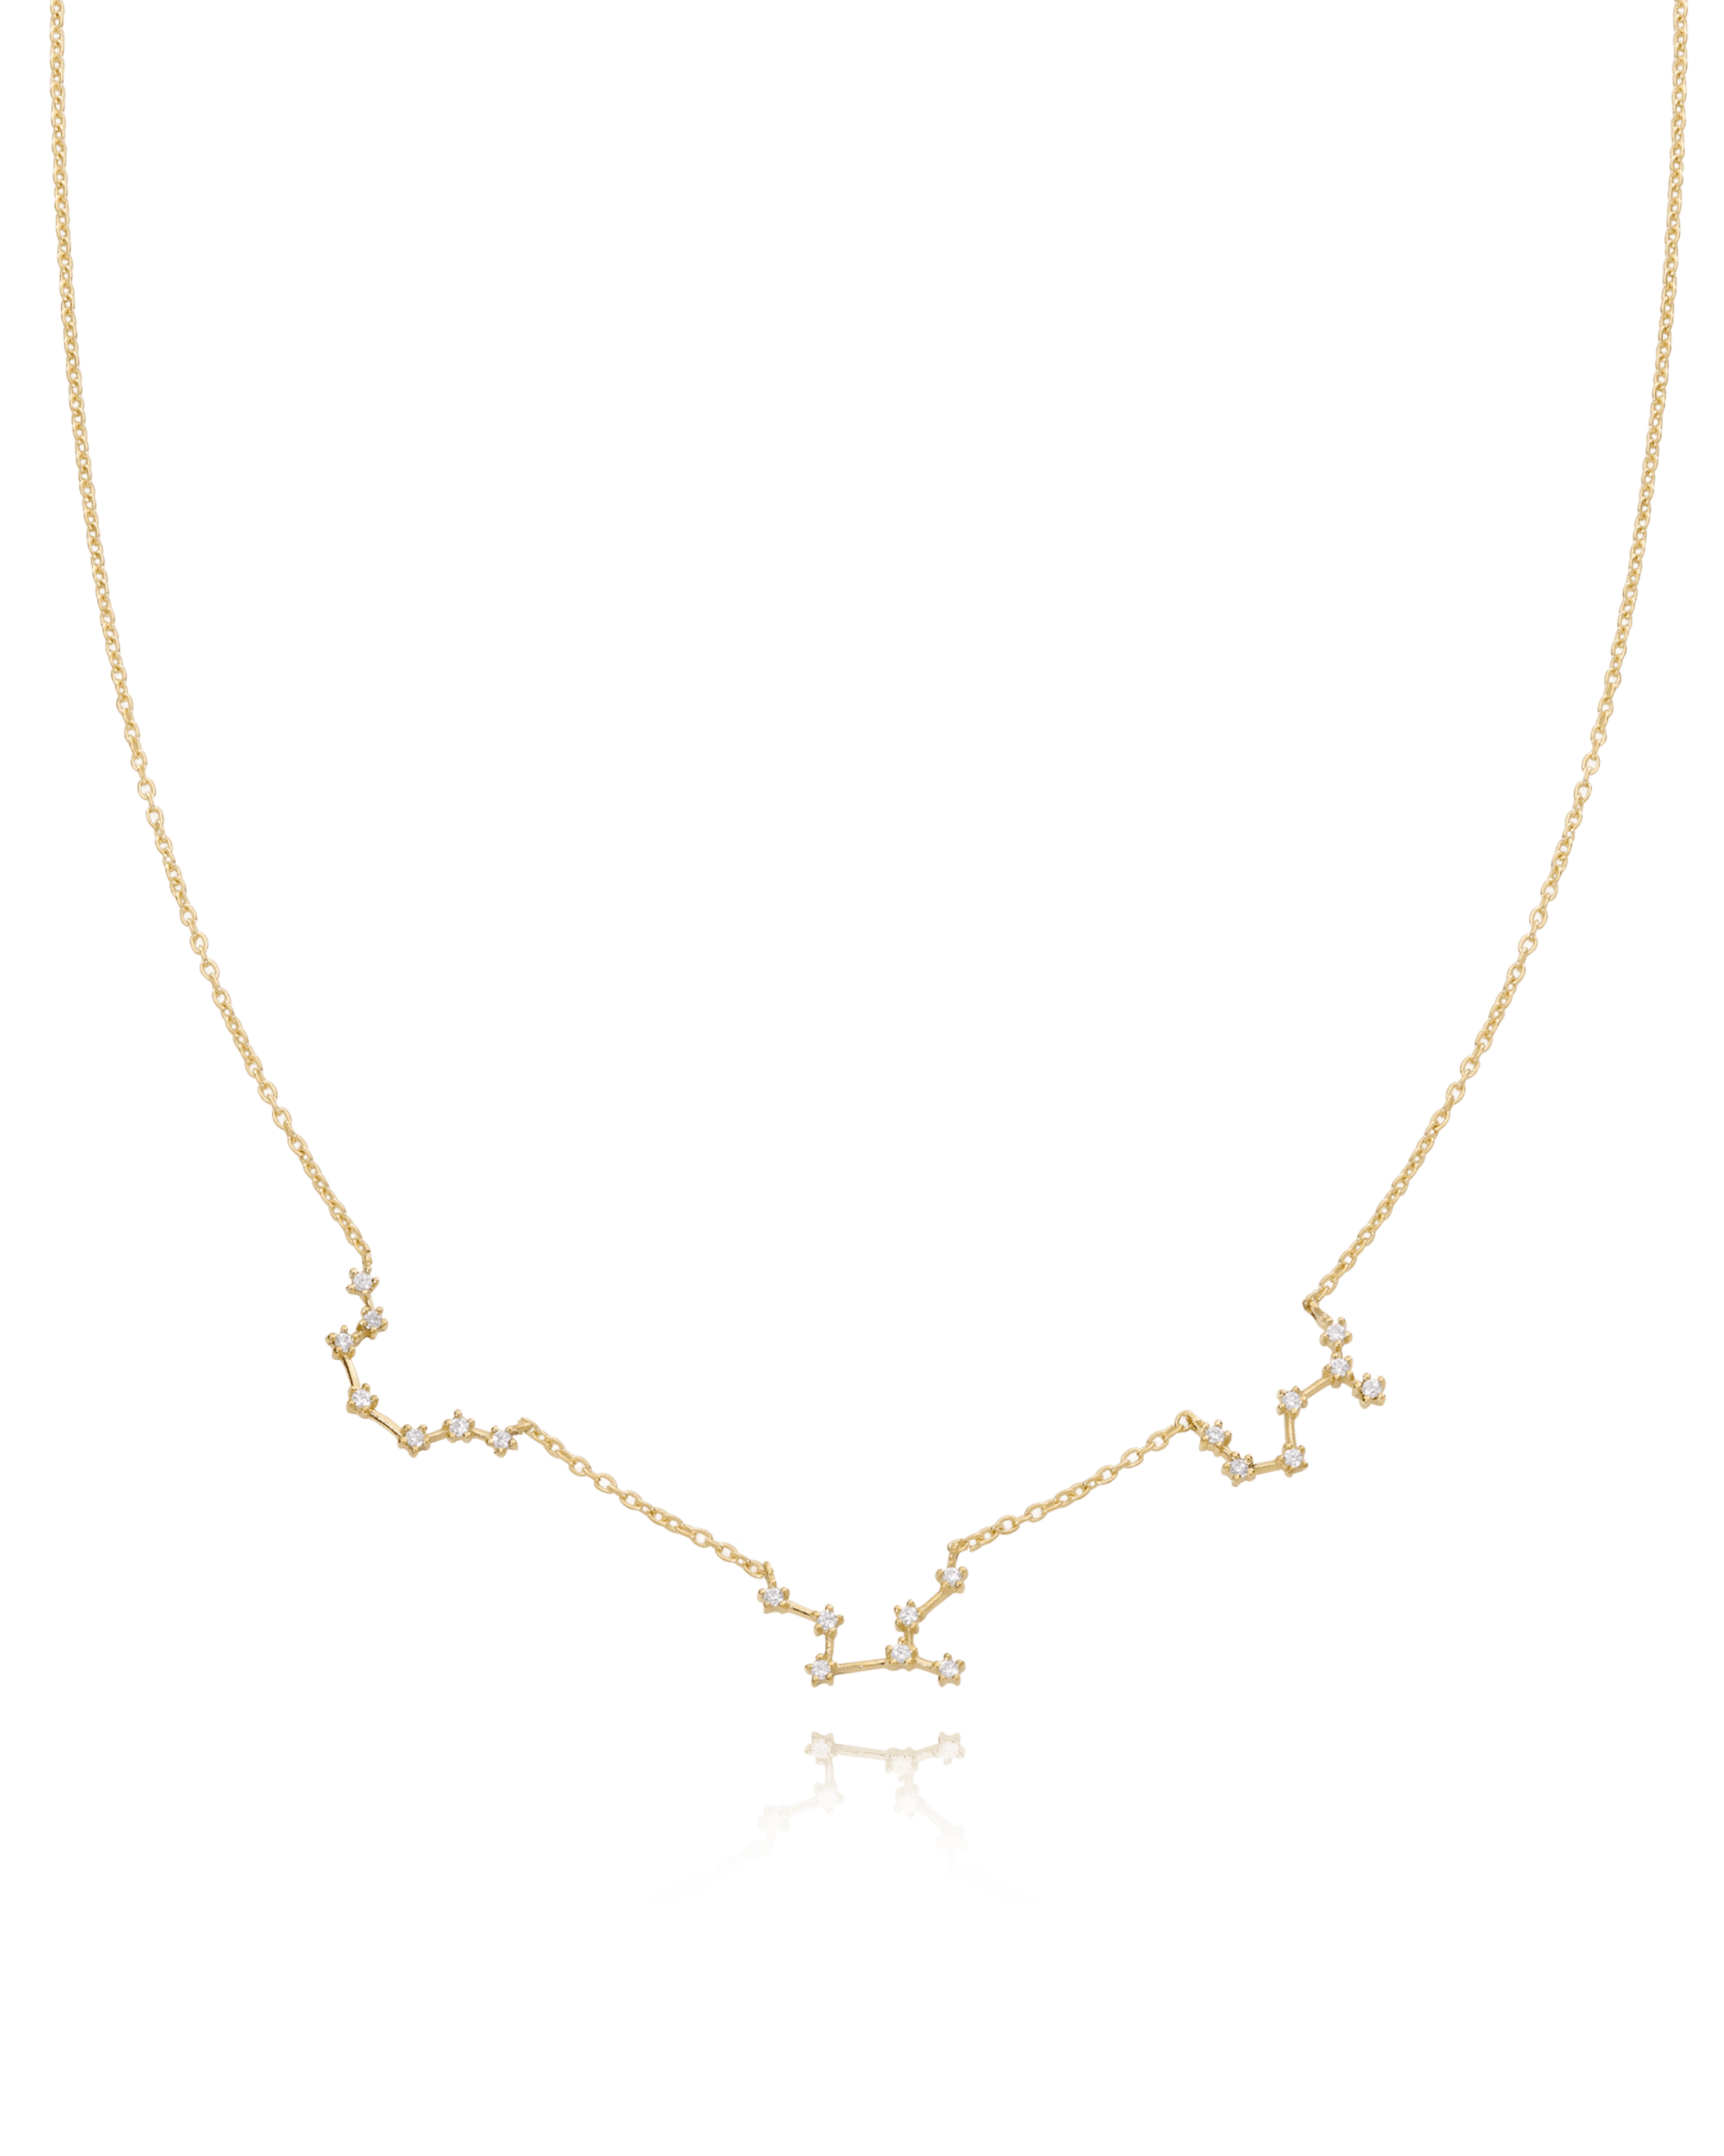 Constellation Necklace with Diamonds - 925 Sterling Silver Necklaces magal-dev 